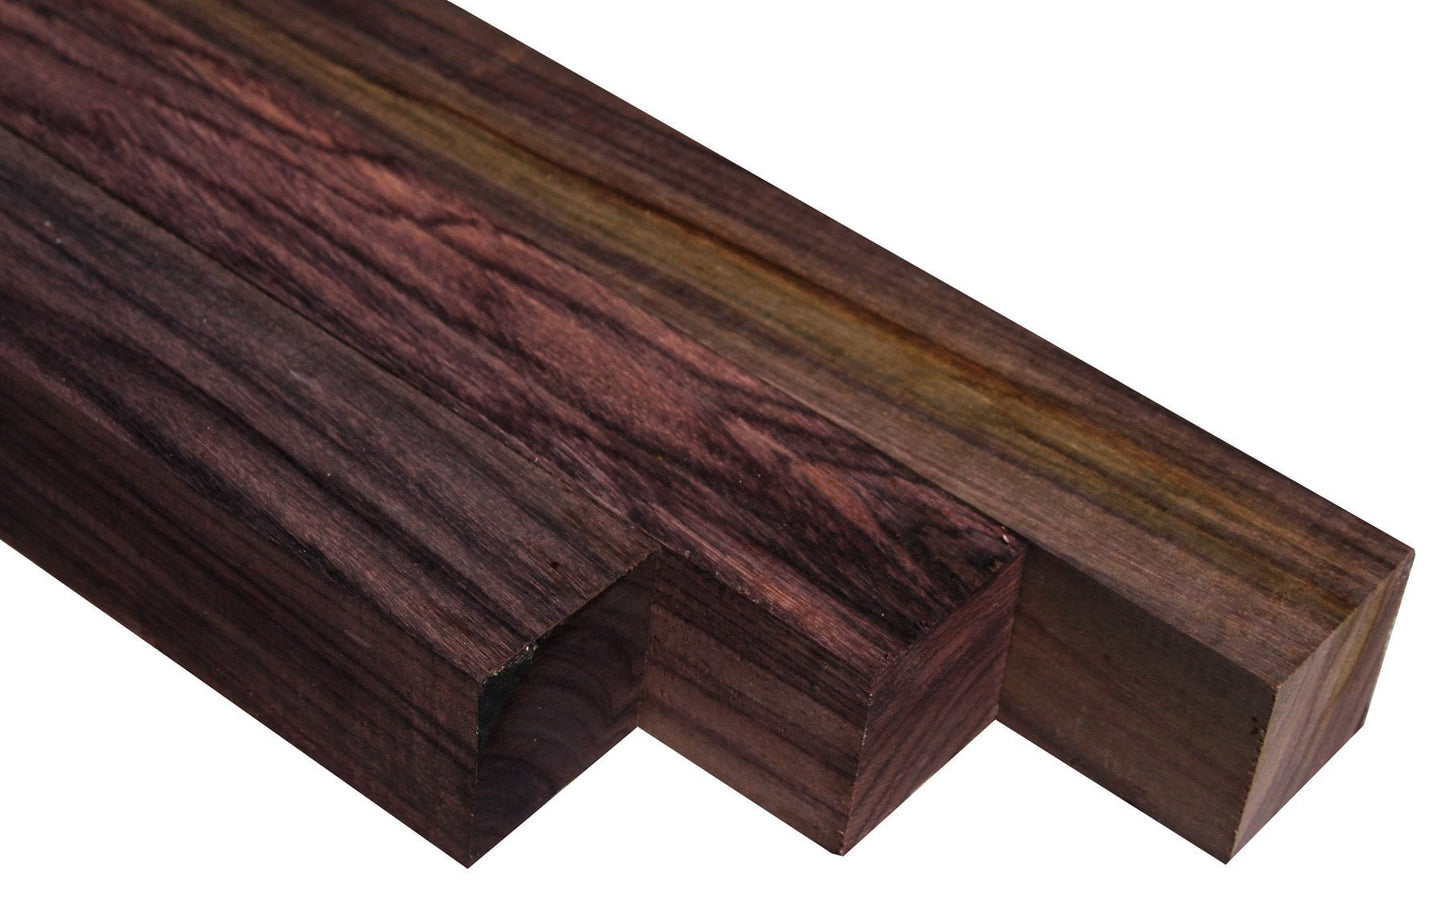 East Indian Rosewood Turning Square (18" x 2" x 2")